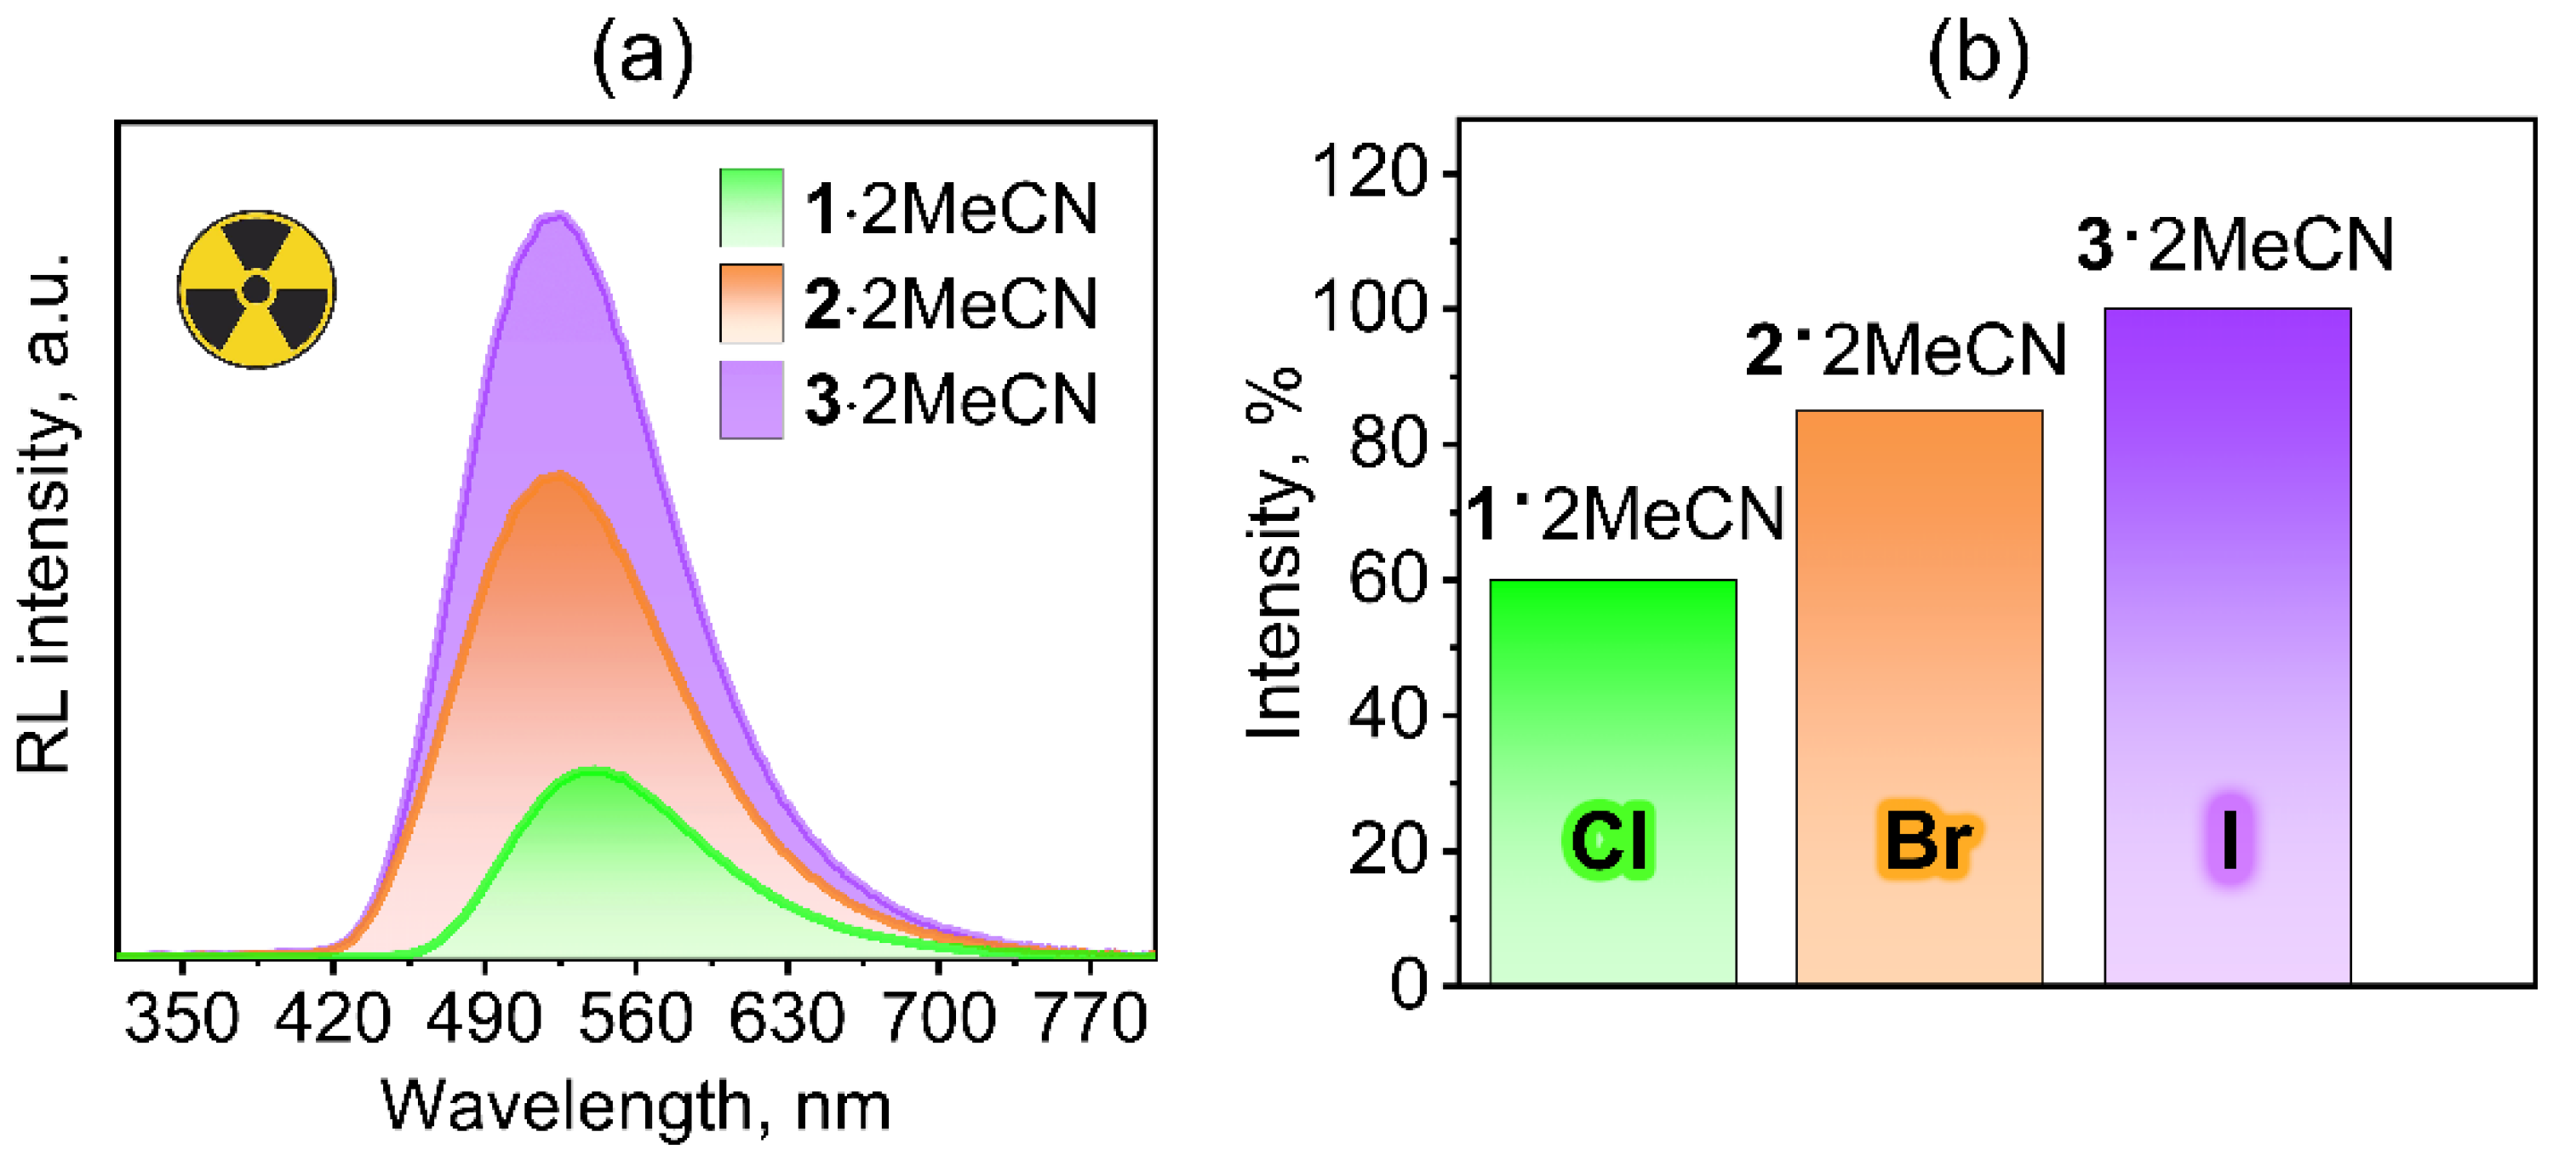 Entropy-driven charge-transfer complexation yields thermally activated  delayed fluorescence and highly efficient OLEDs